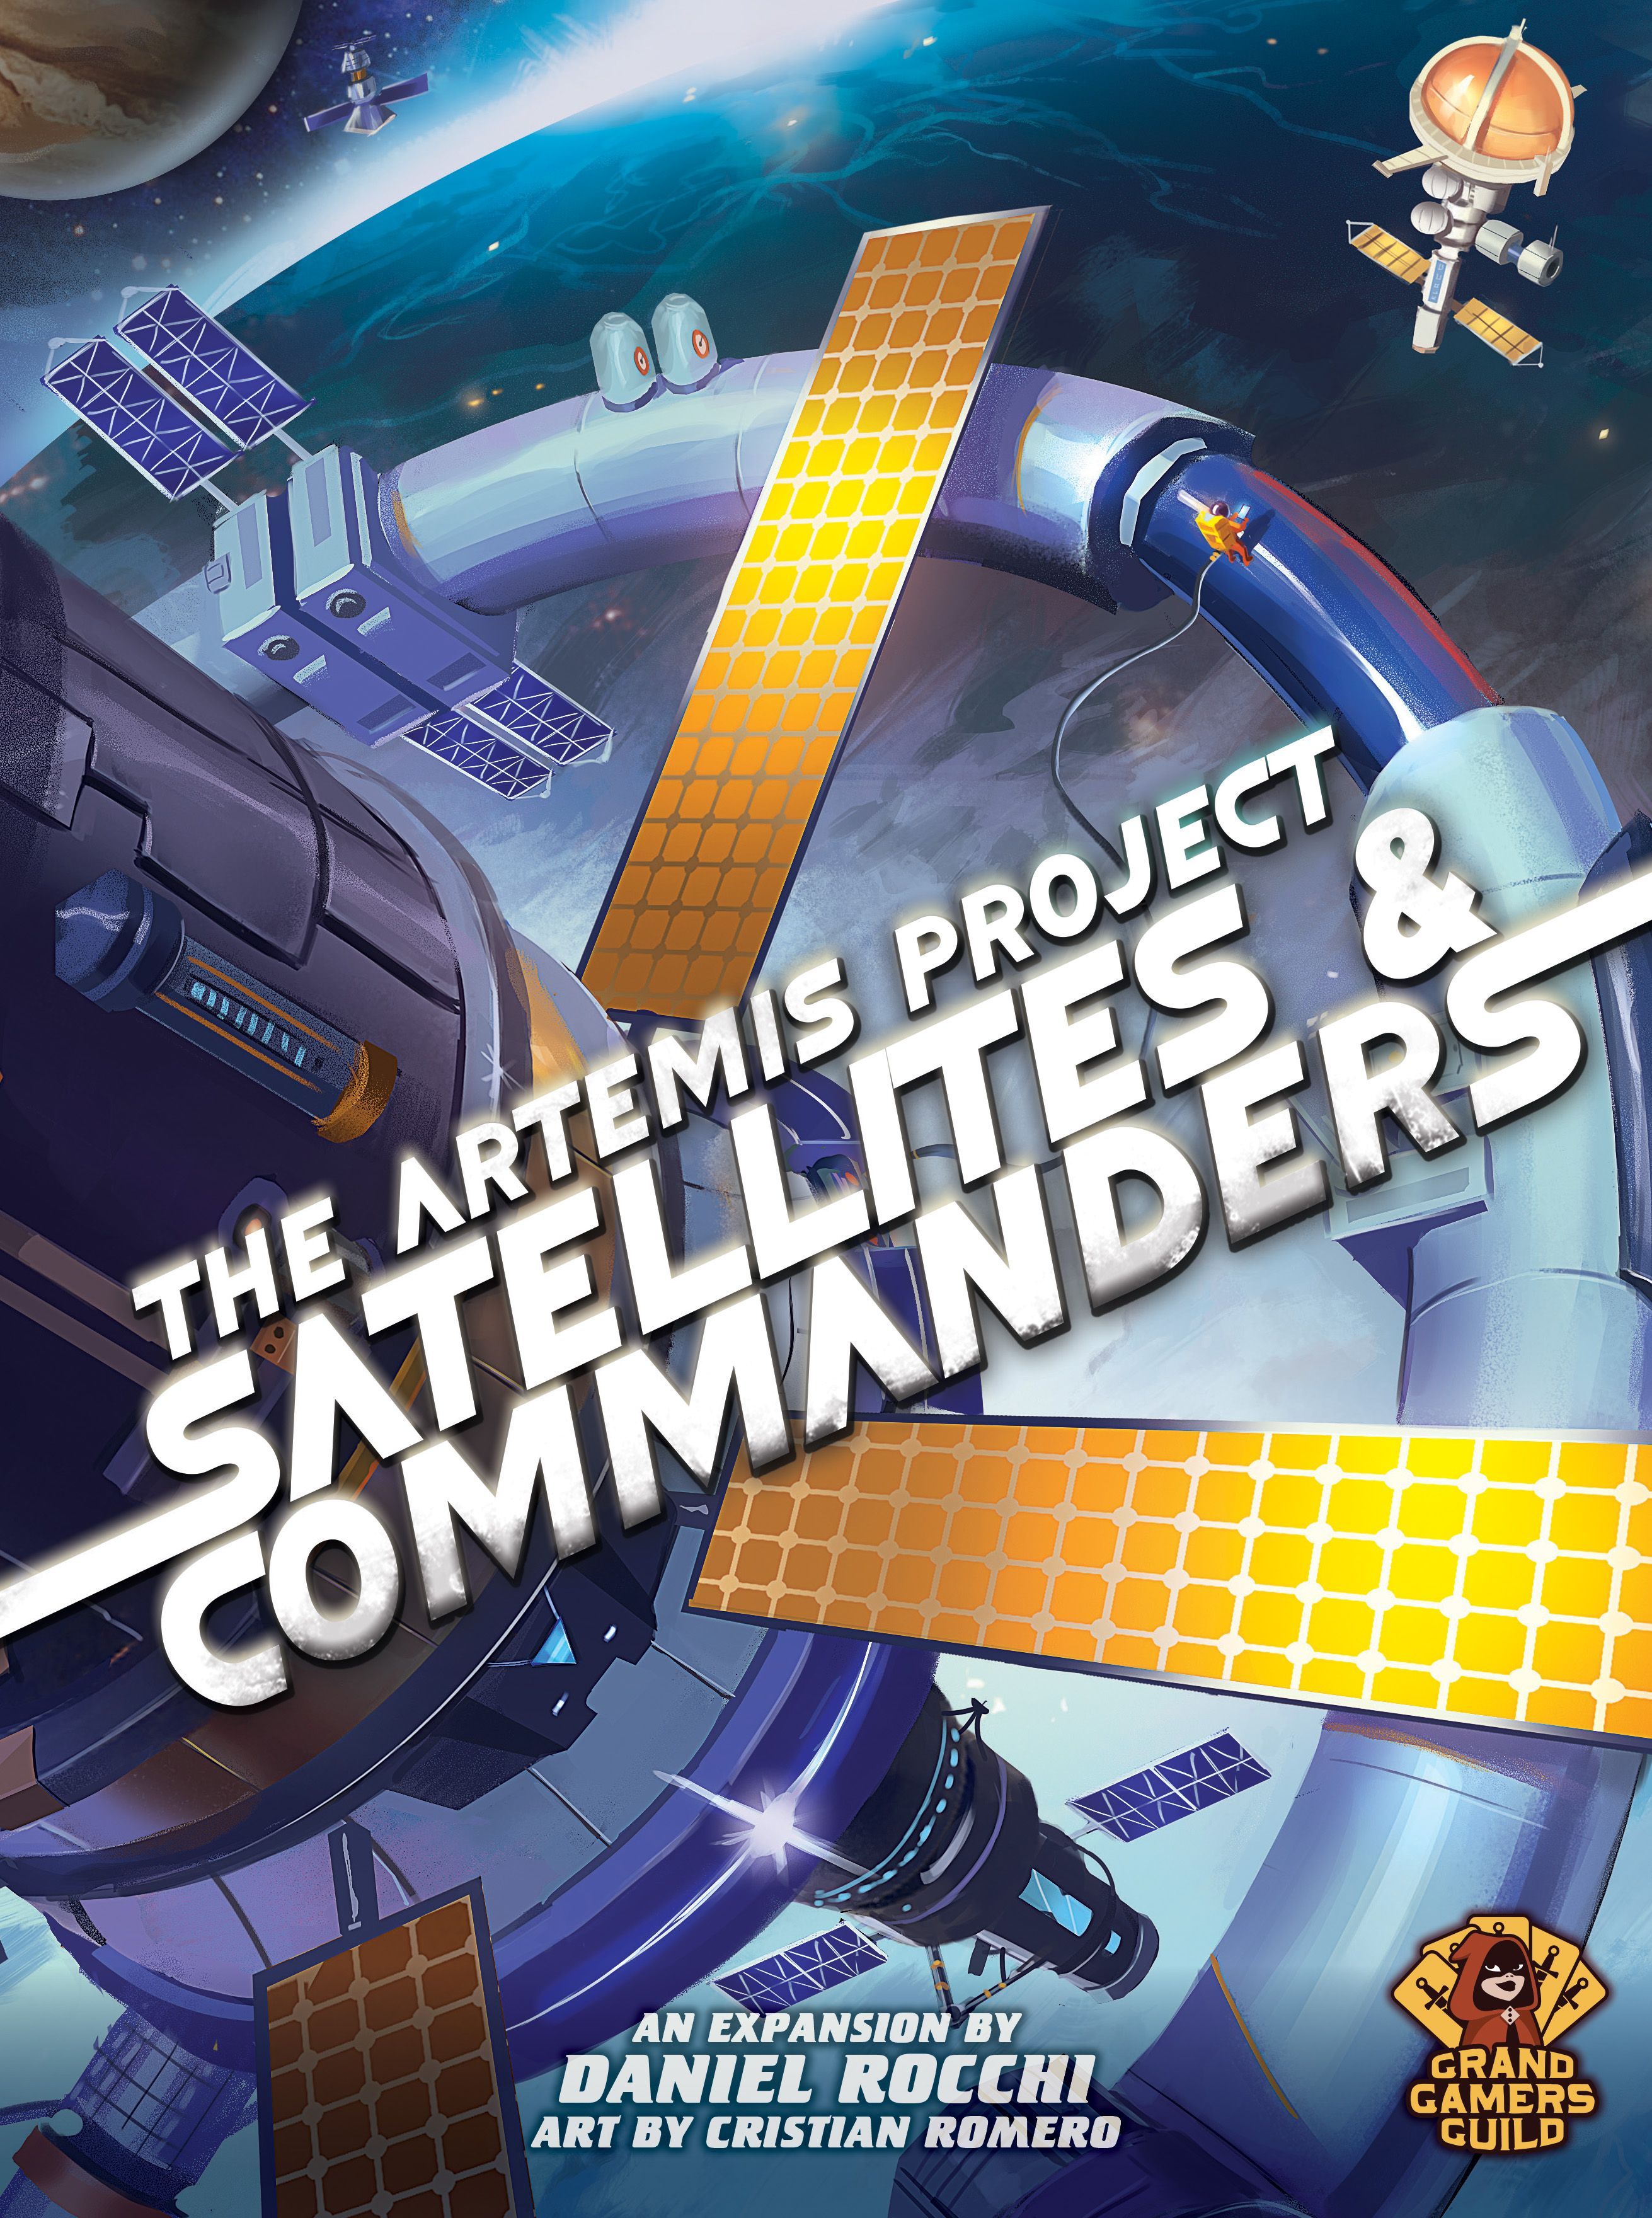 Grand Gamers Guild The Artemis Project: Satellites & Commanders